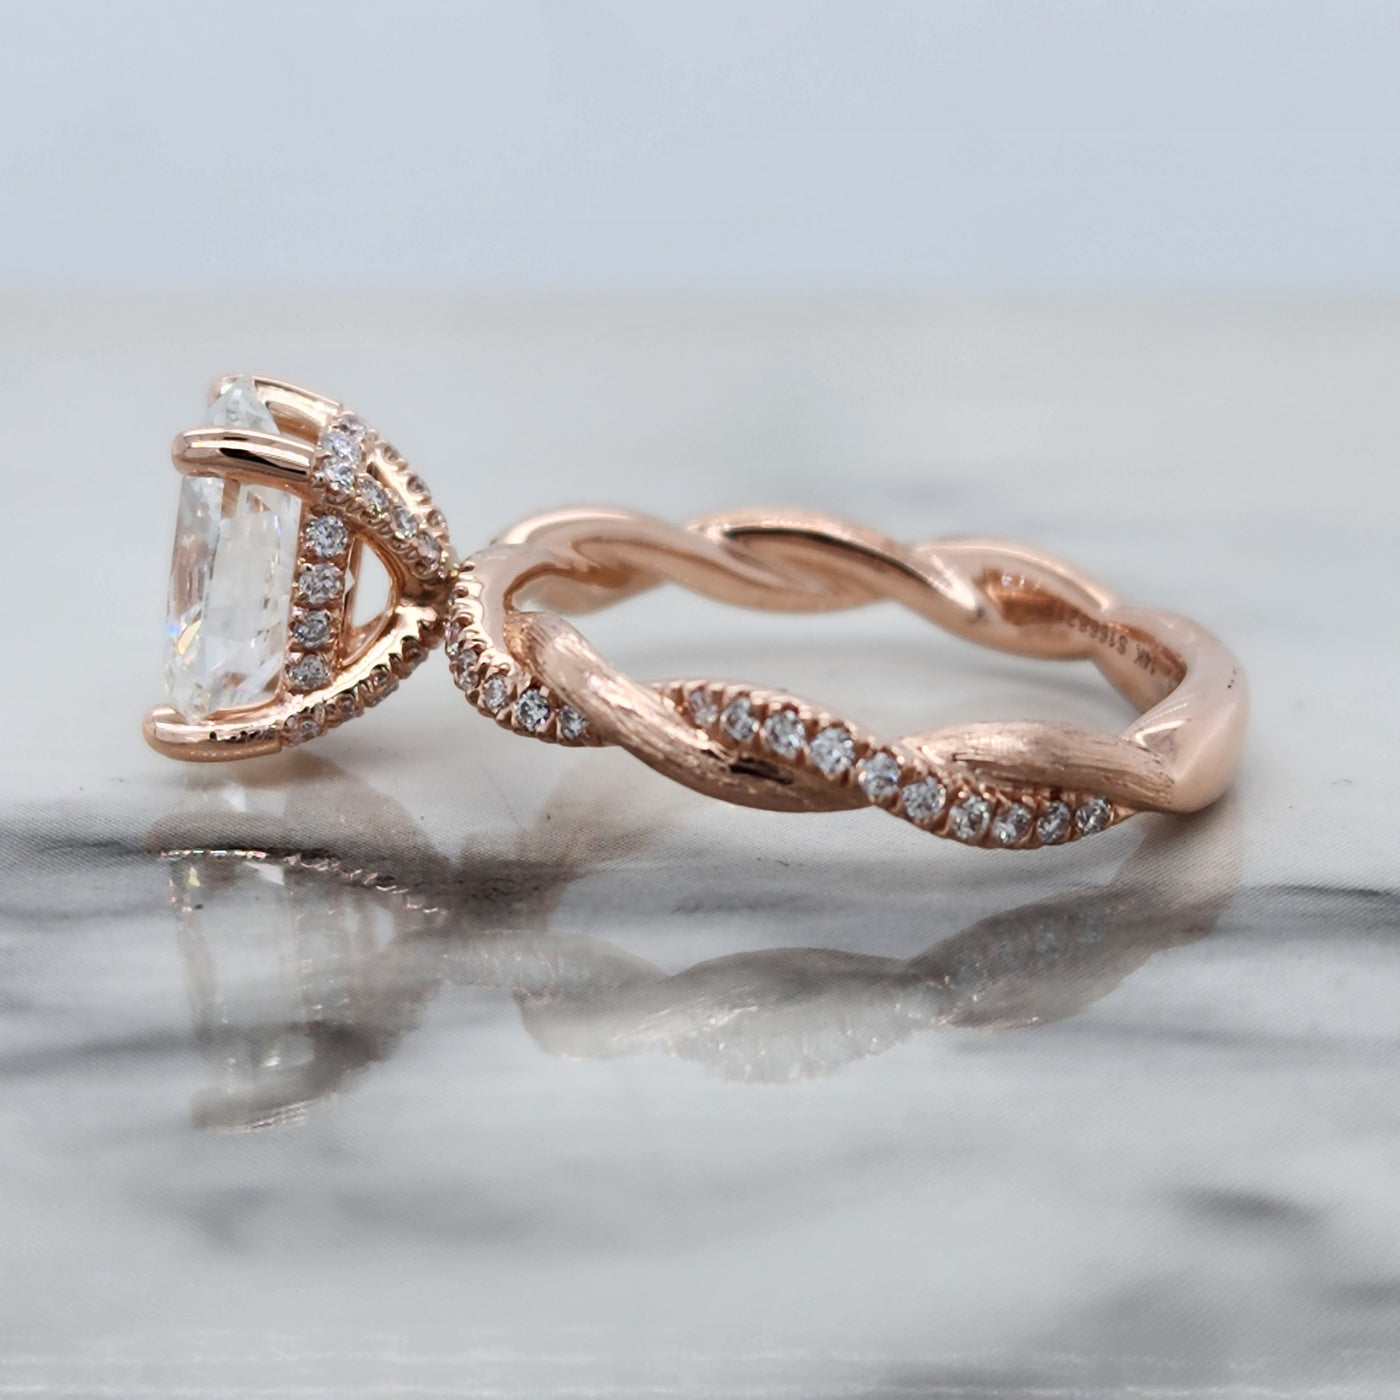 Rose Gold Engagement Ring With Oval Diamond Center and Distressed Finish